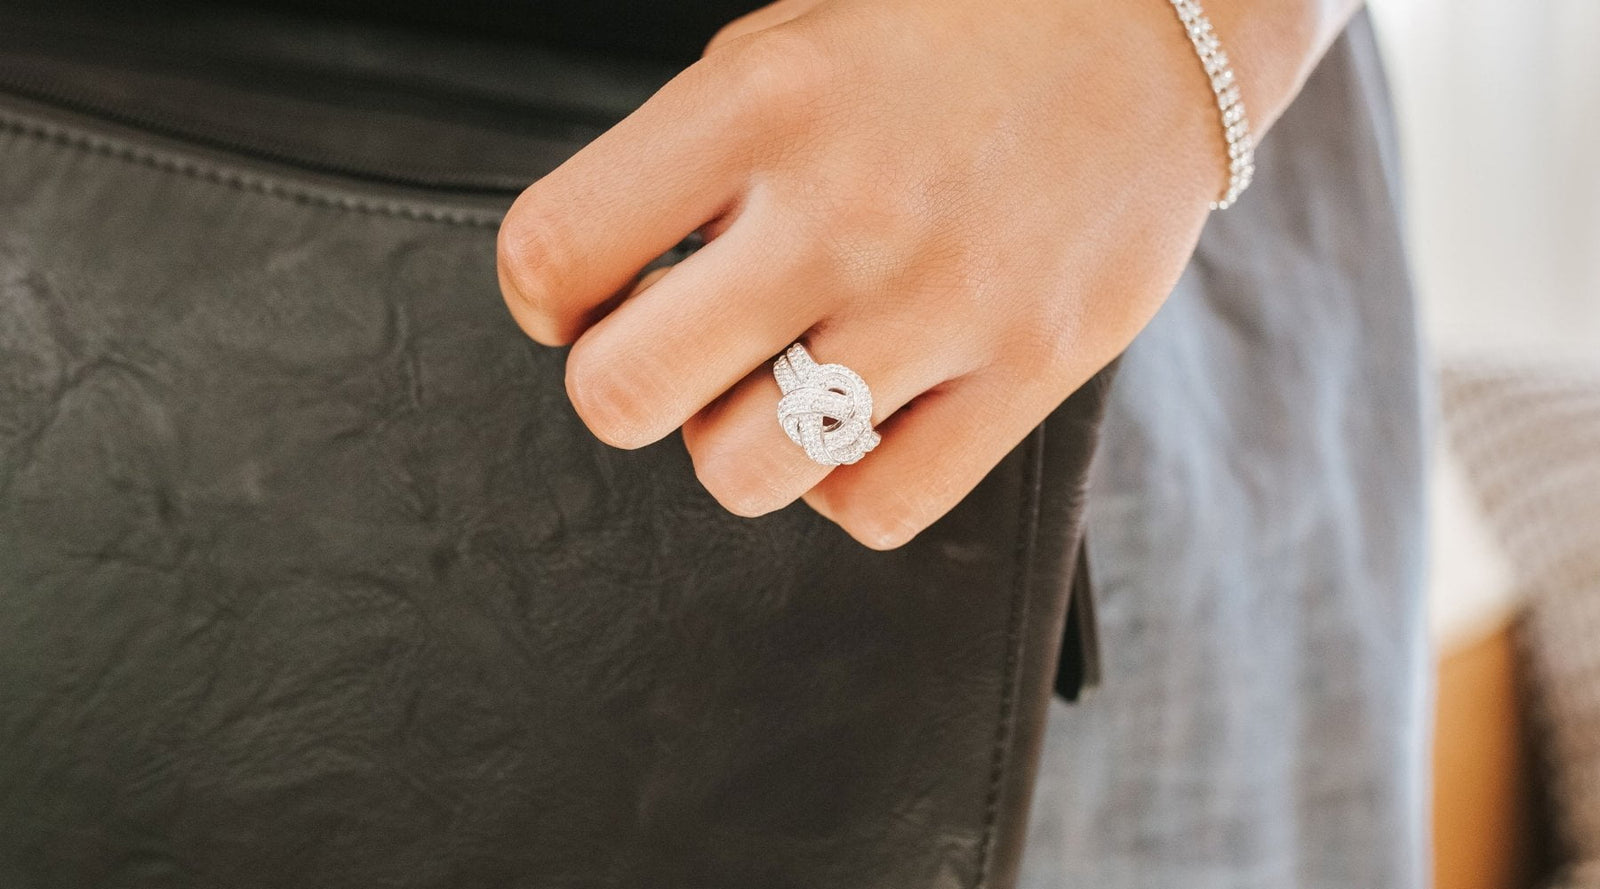 How To Wear Your Wedding and Engagement (and Other) Rings - BAUNAT